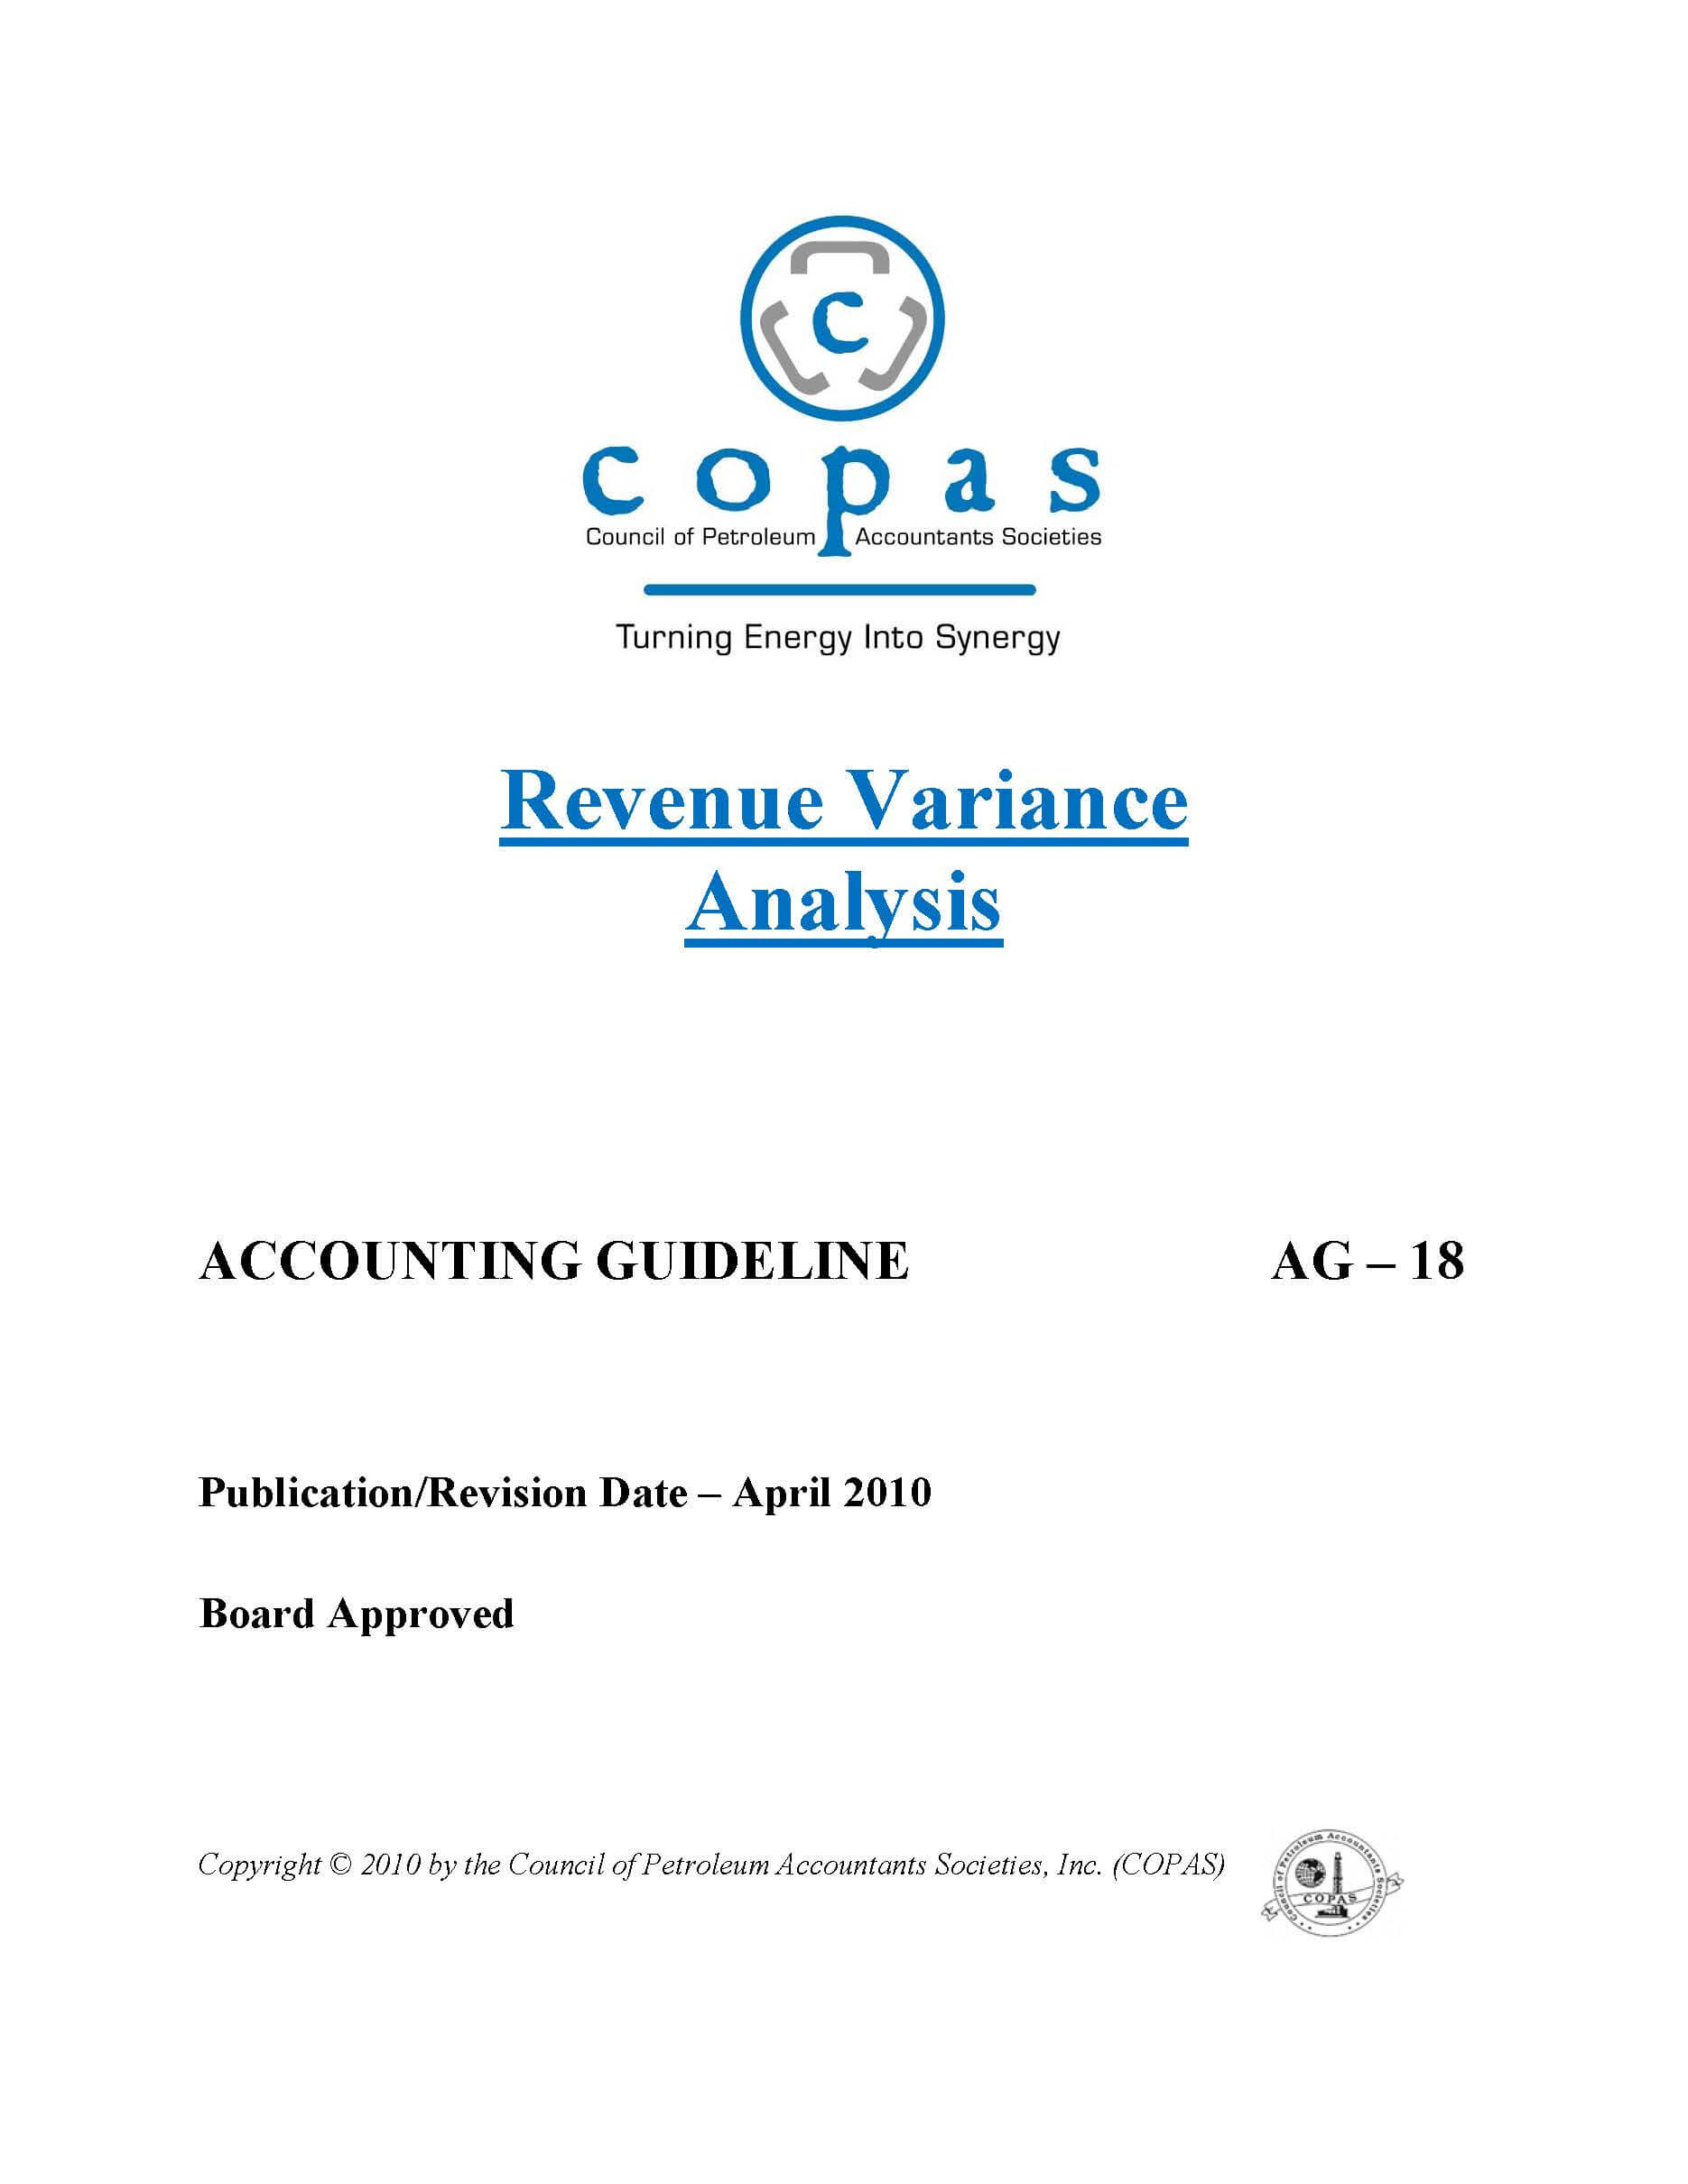 AG-18 Revenue Variance Analysis - products AG 18 Revenue Variance Analysis - Council of Petroleum Accountants Societies